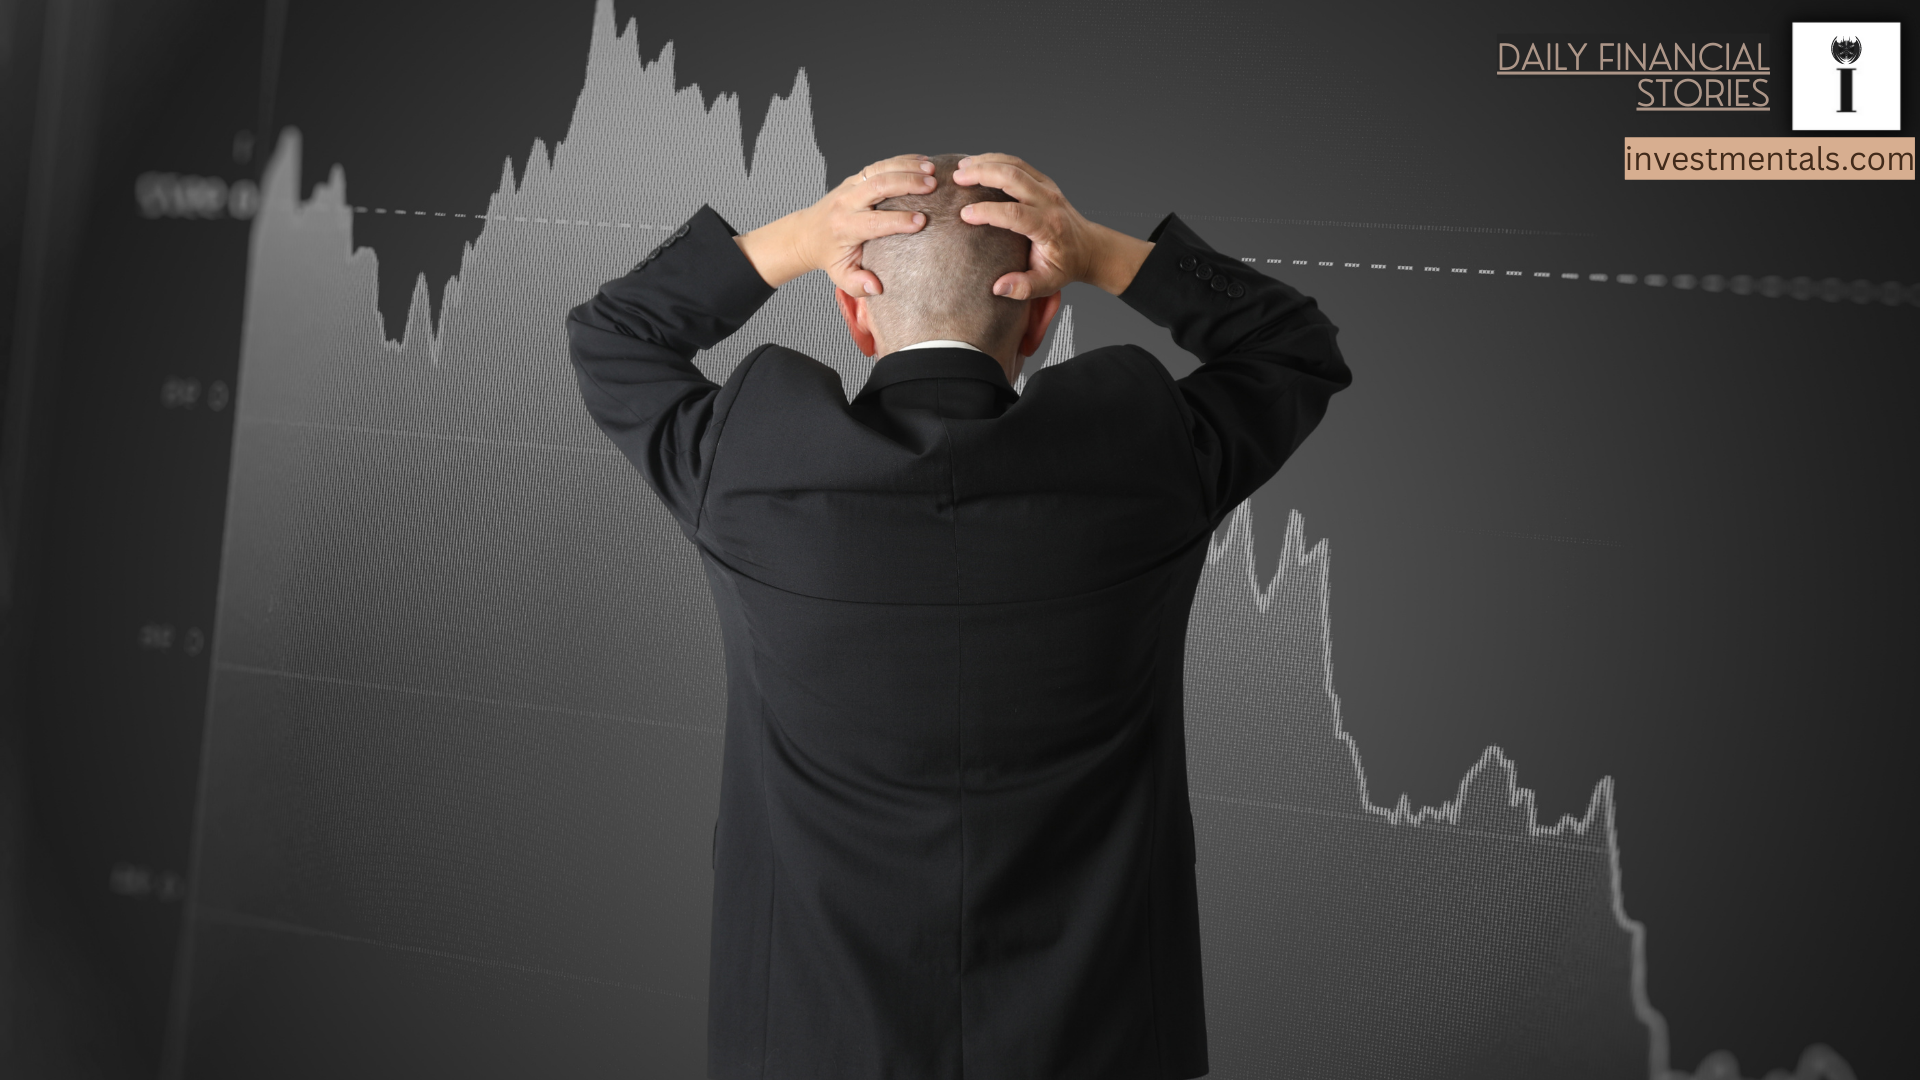 The Psychologies involved in a Stock Market Crash